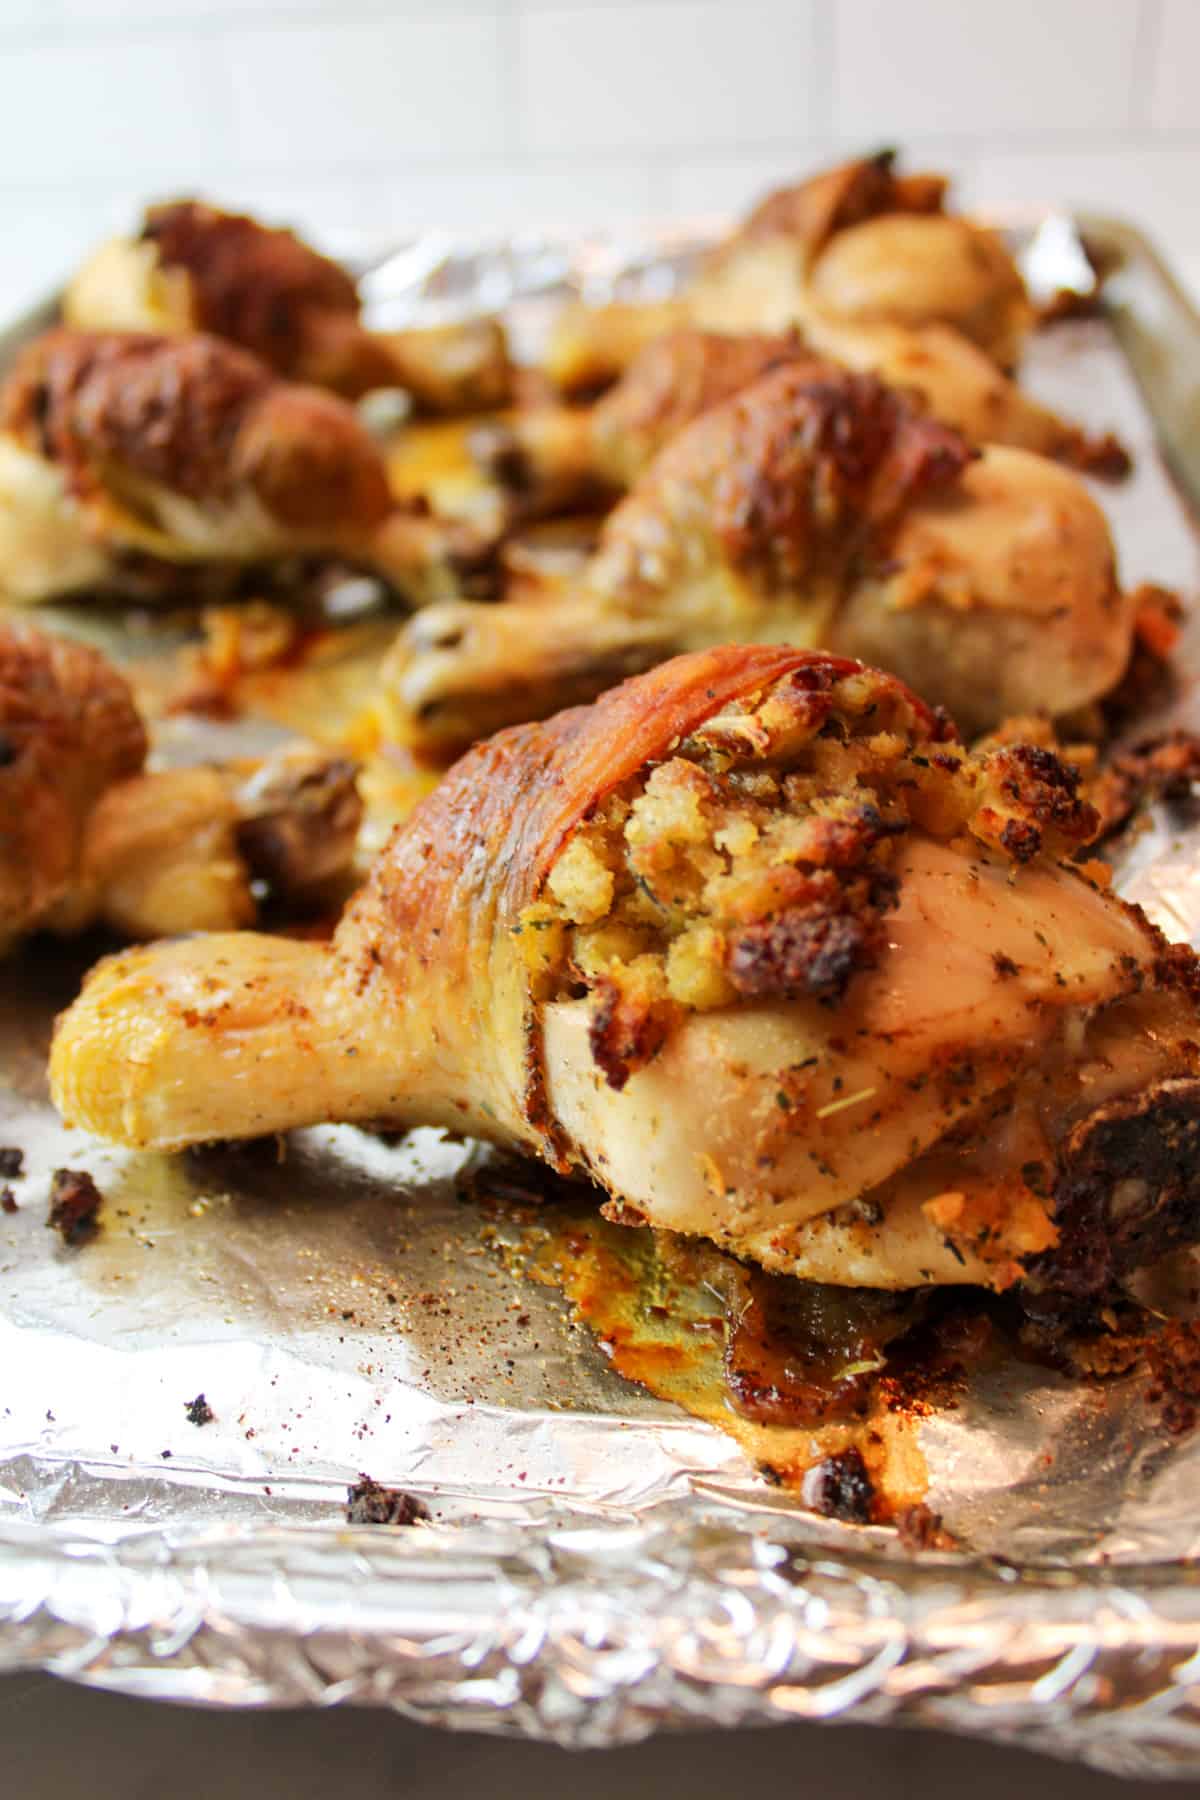 baked stuffed chicken leg on a foil lined baking sheet with more stuffed chicken in the background.